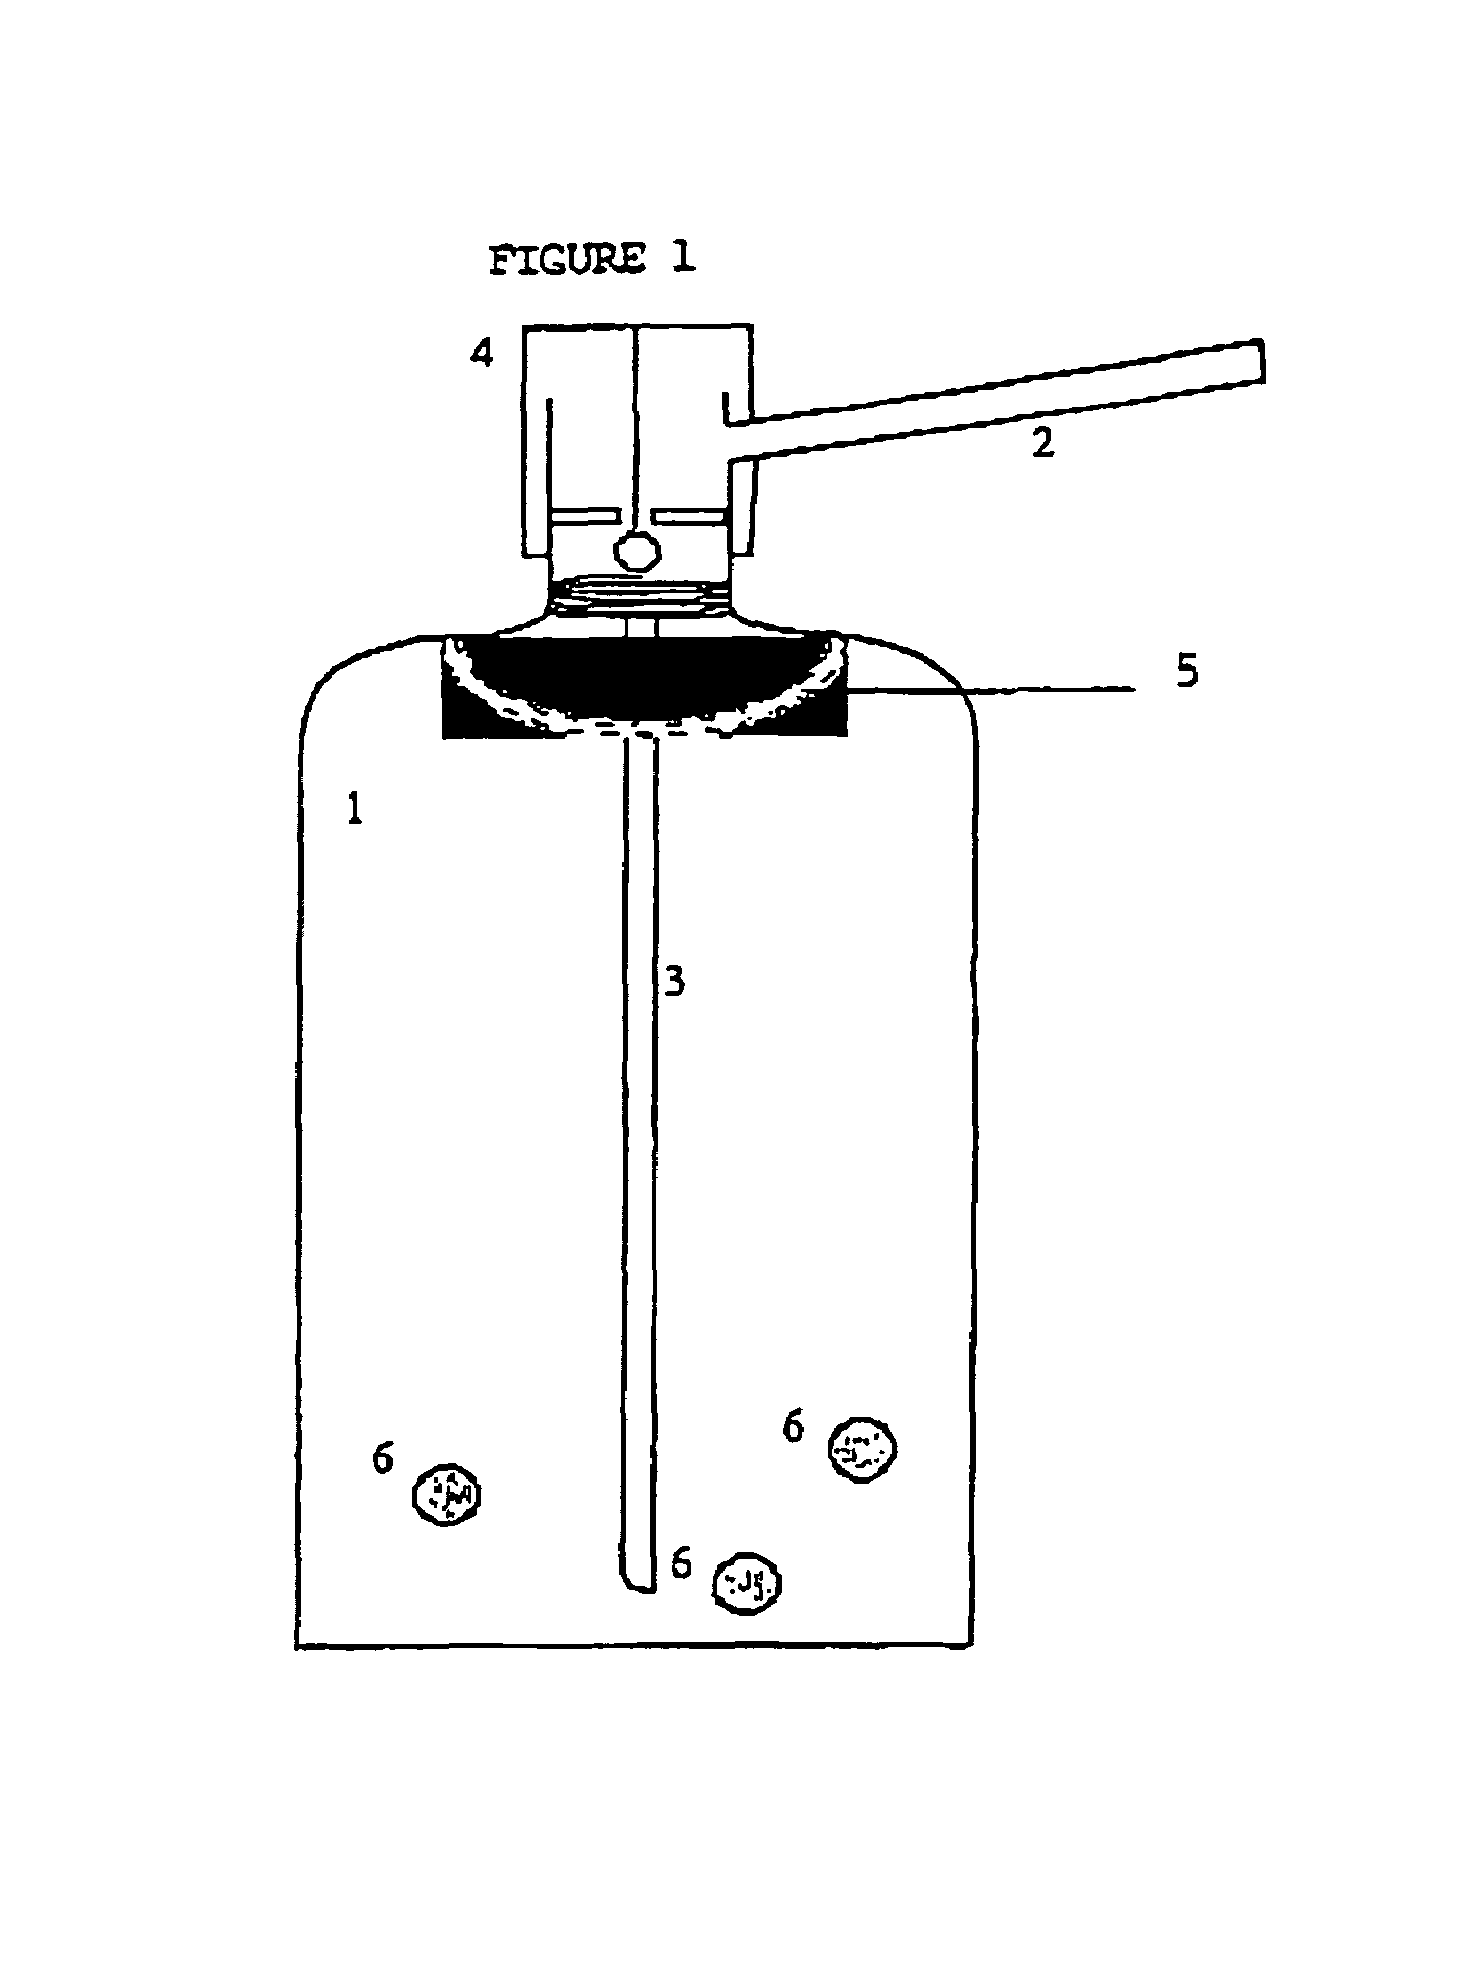 Method for preparation of biocides mixed with carbon dioxide in a pressurized container